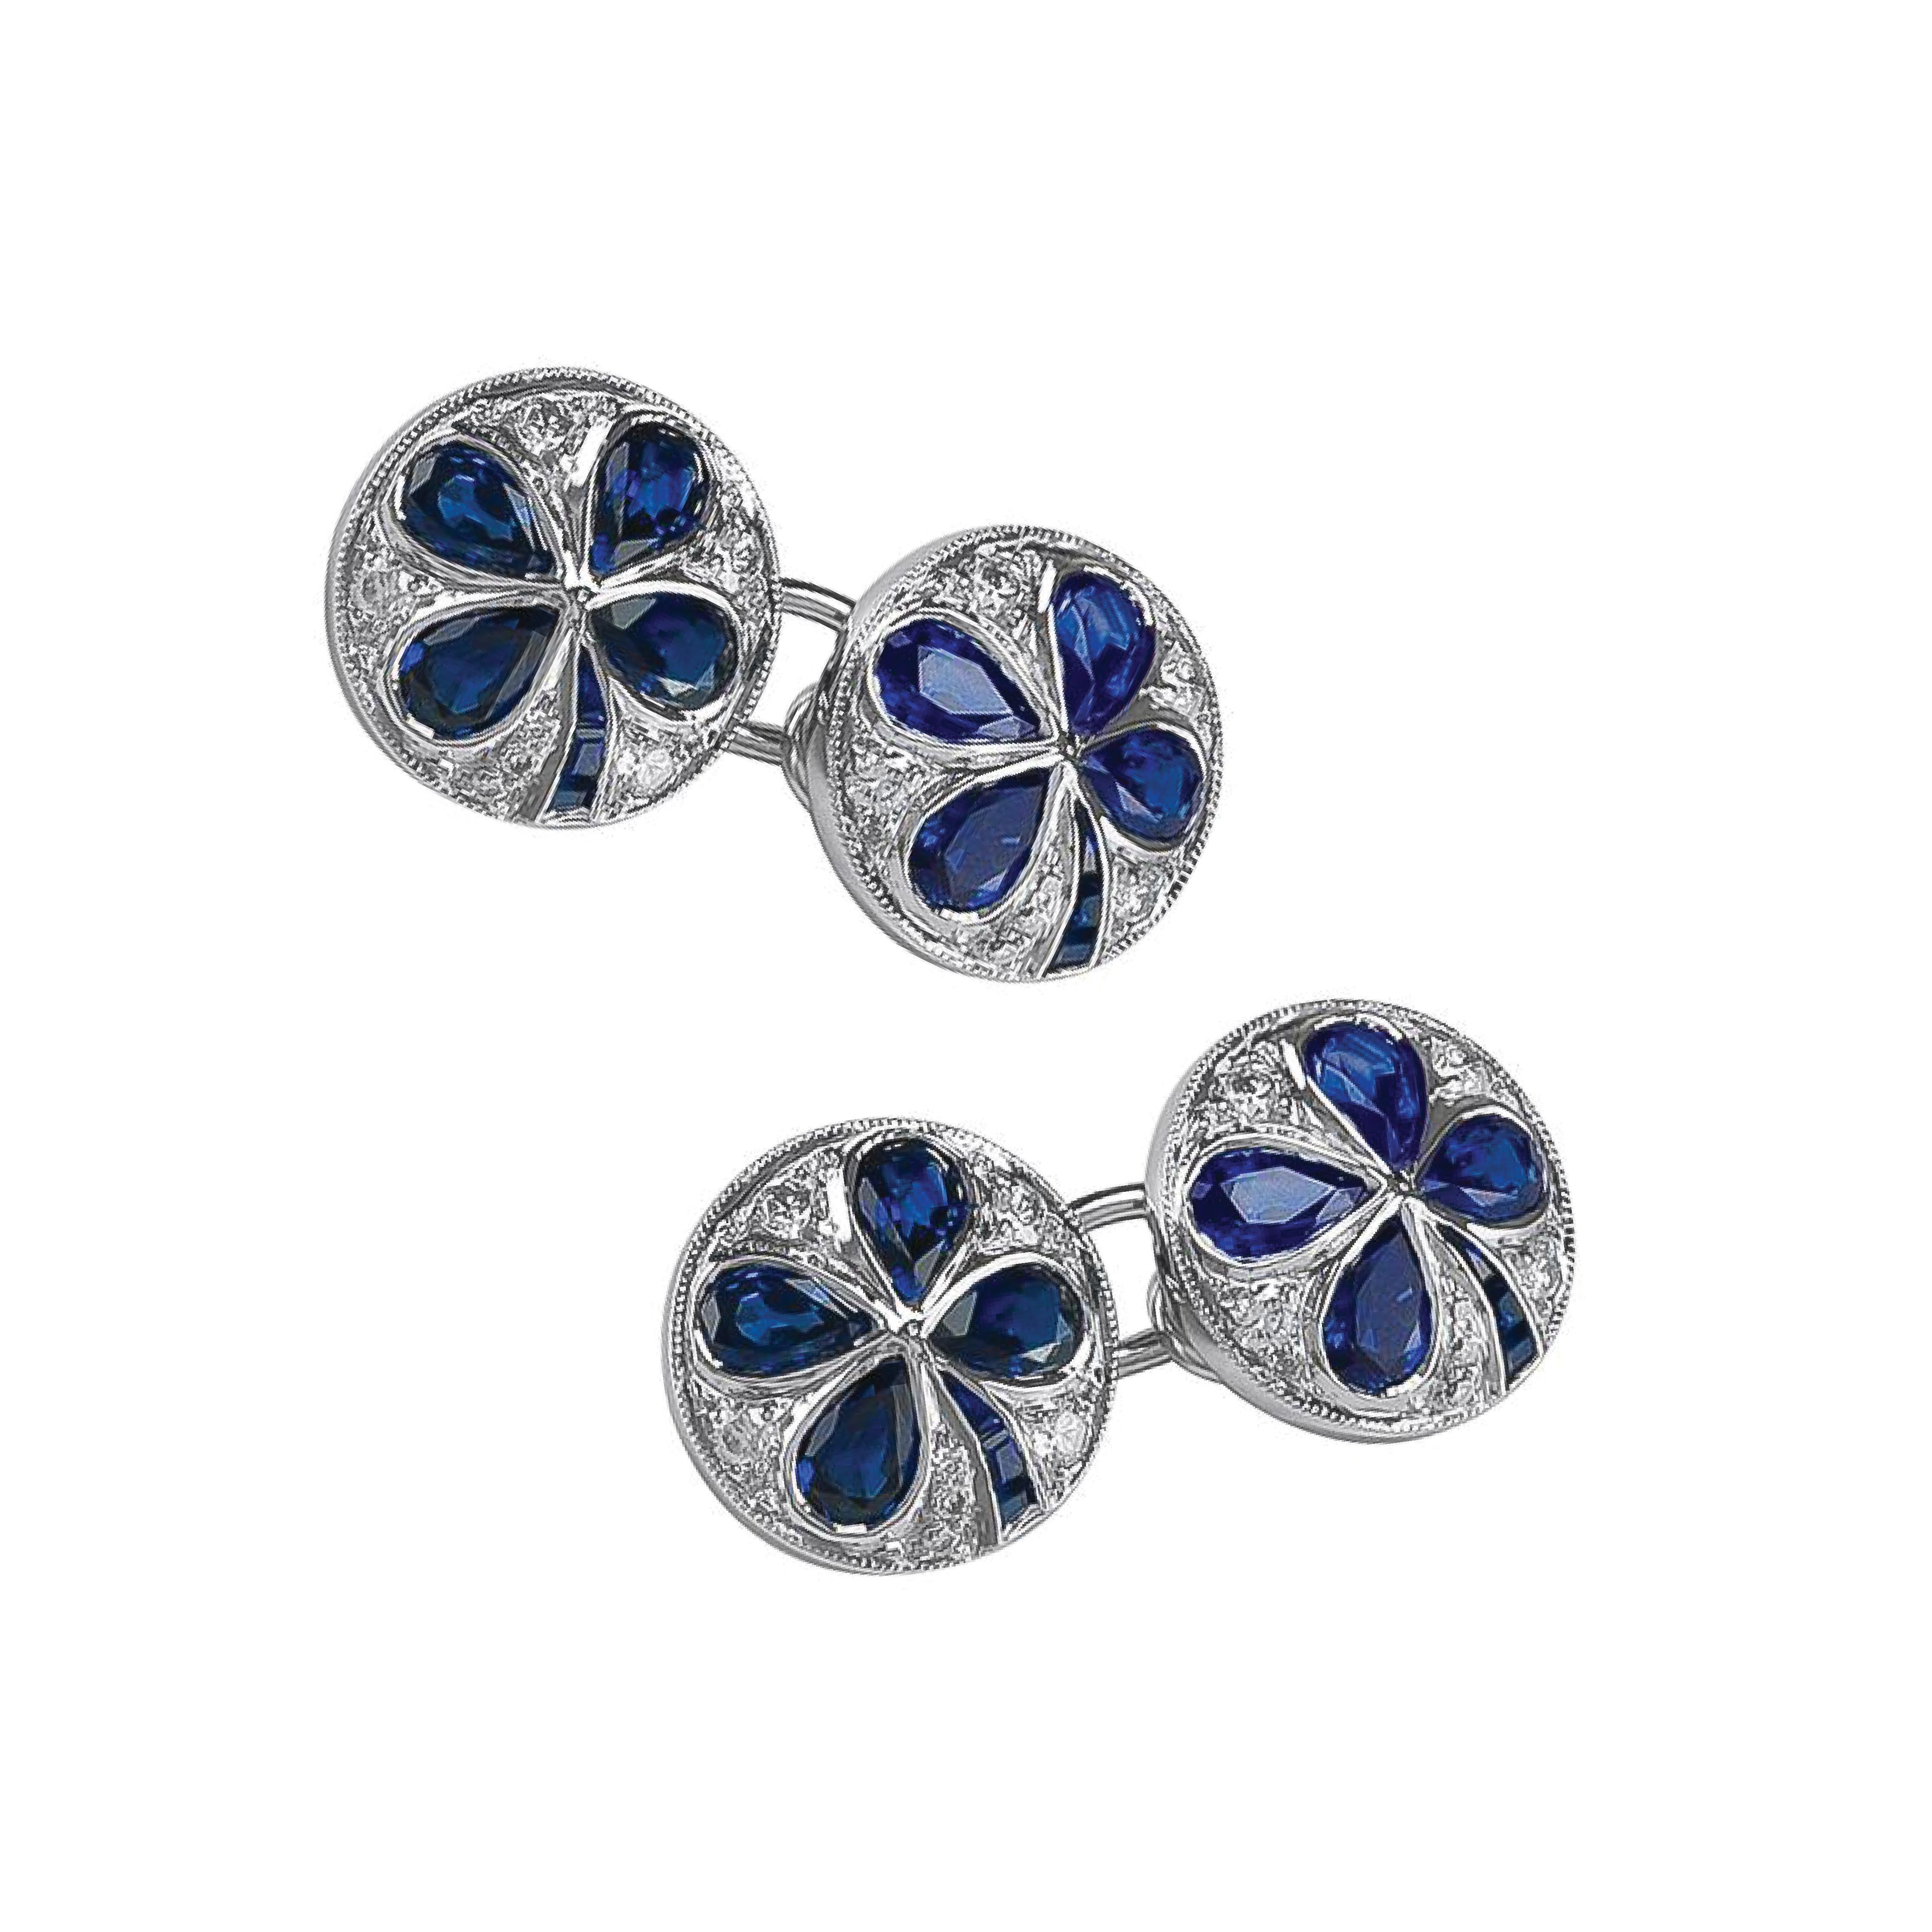 Elegant cufflinks in platinum setting with blue sapphires in clover design weighing 4.74 carats and Diamonds that weigh 0.52 carats.

Sophia D by Joseph Dardashti LTD has been known worldwide for 35 years and are inspired by classic Art Deco design